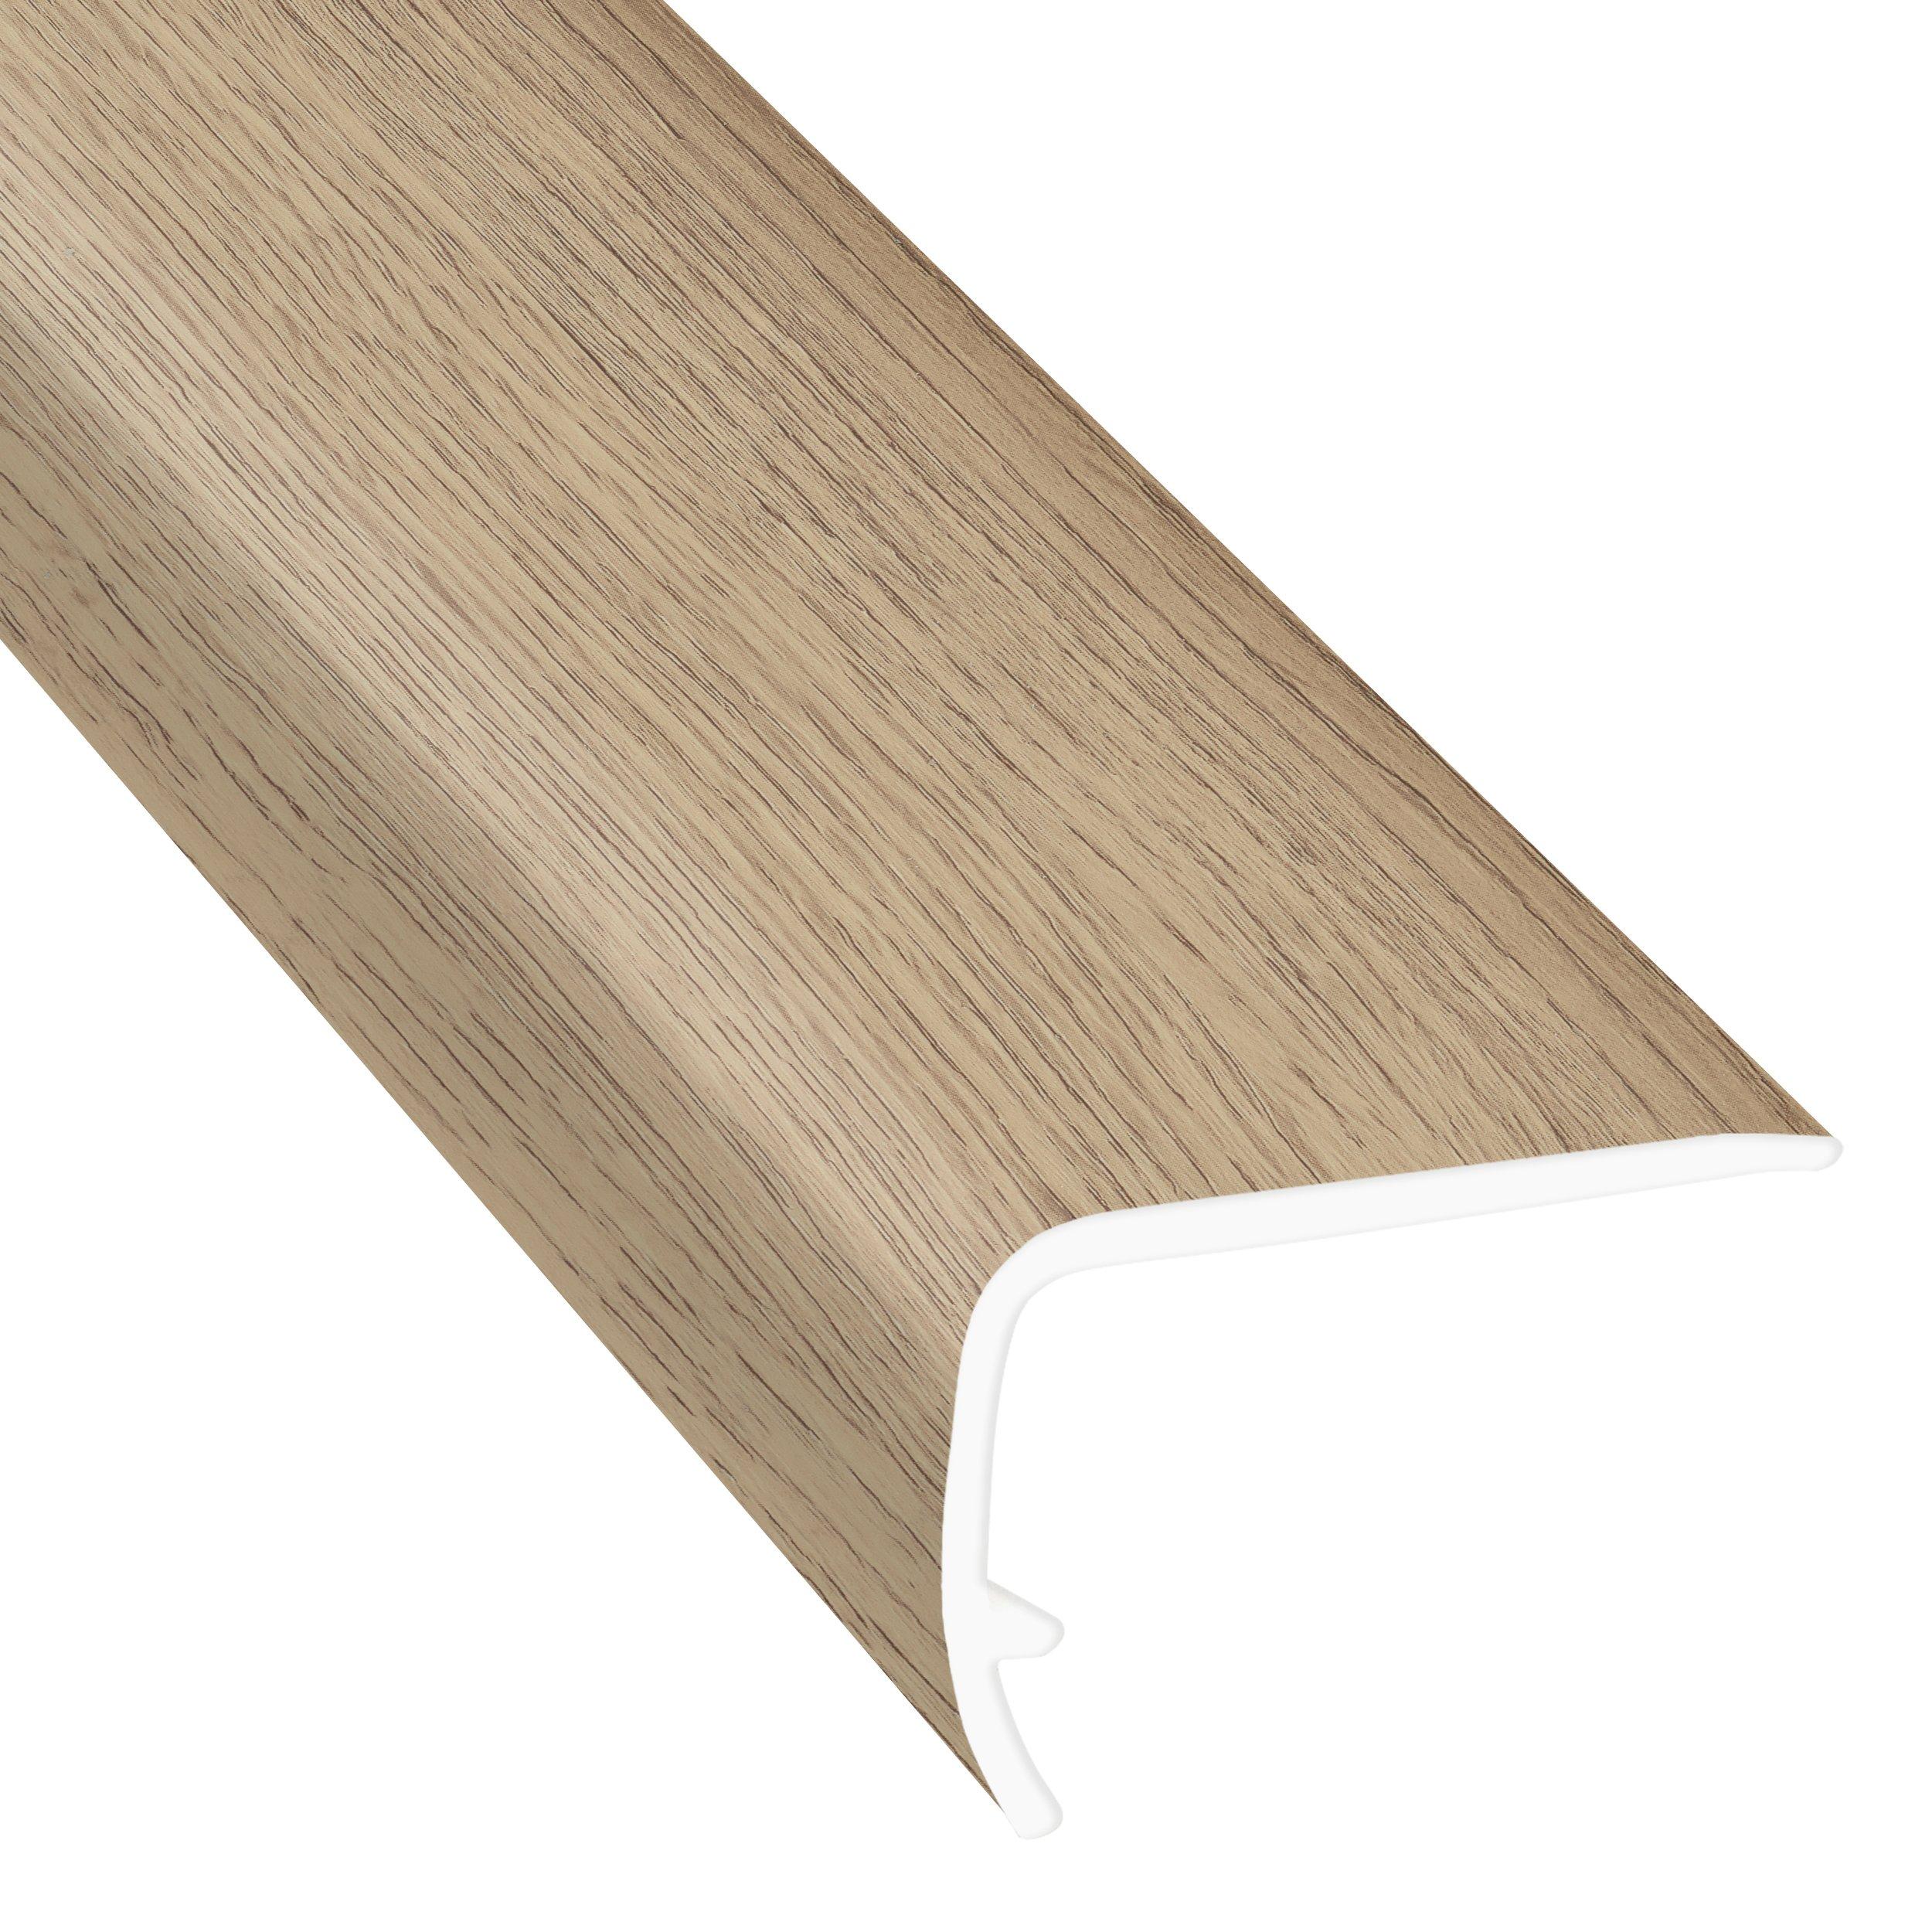 Oakhaven Maple 94in. Vinyl Overlapping Stair Nose